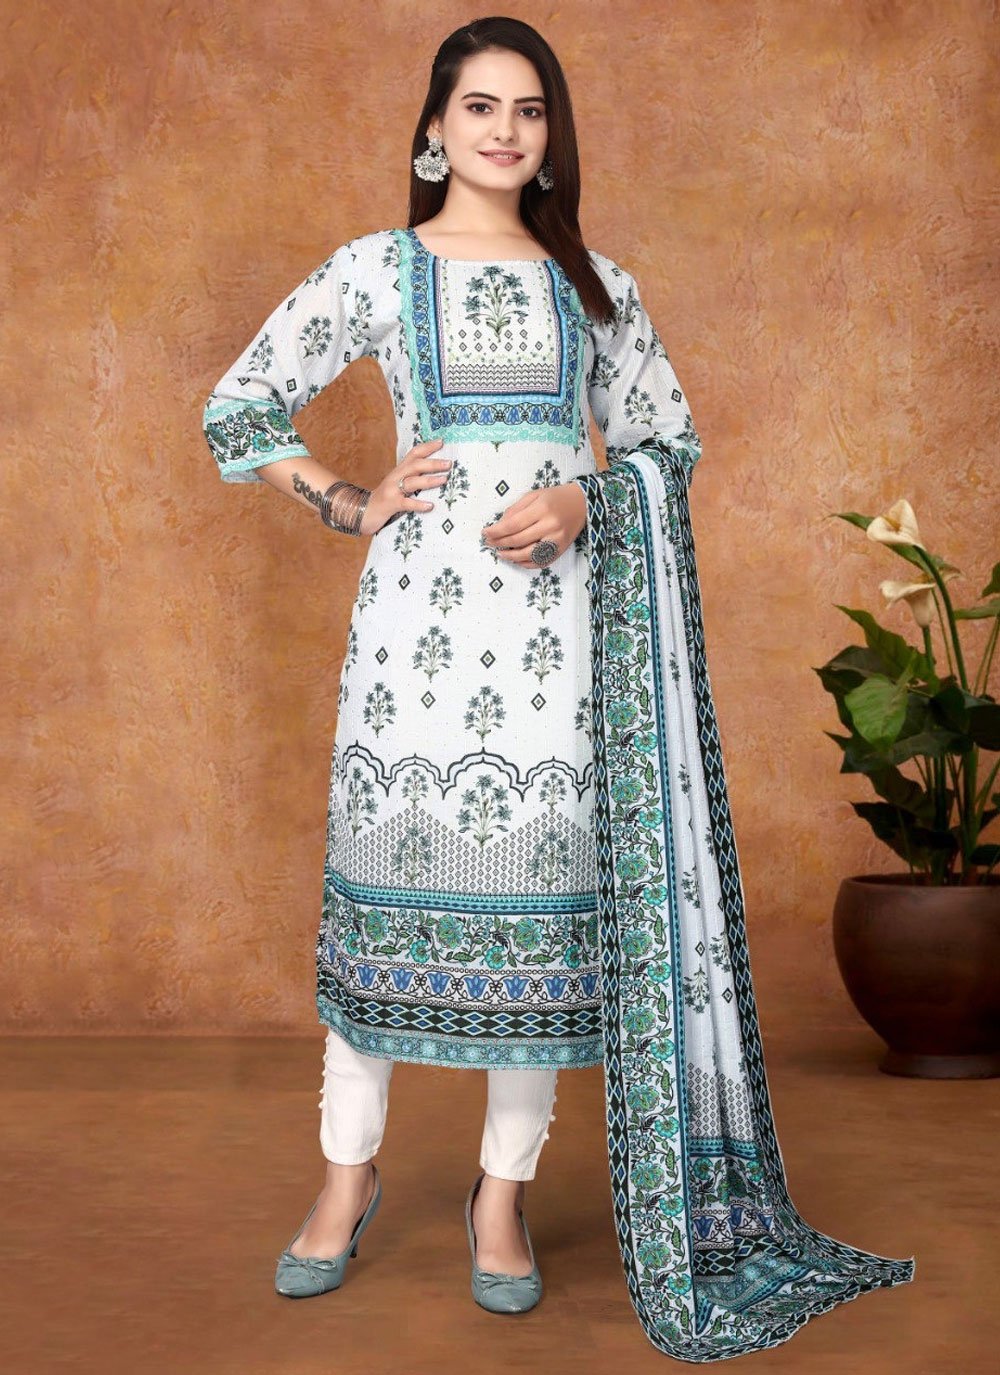 Wonderful White Color Beautiful Jam Cotton Embroidered Moti Work Salwar Suit  Design, Rs 1599.00